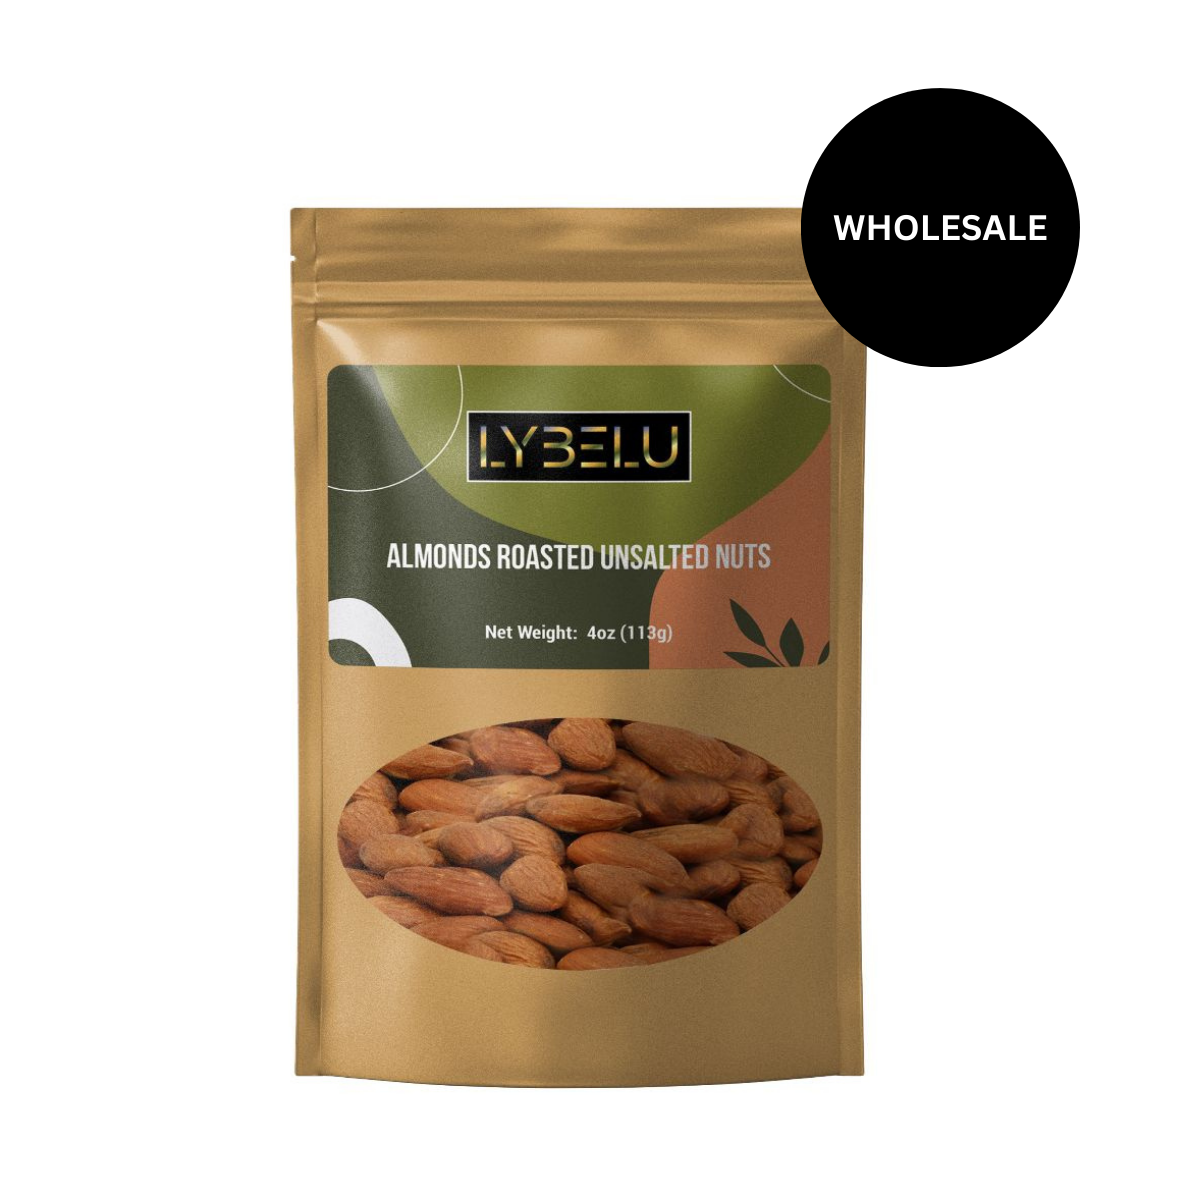 Almonds Roasted Unsalted Nuts – 4oz